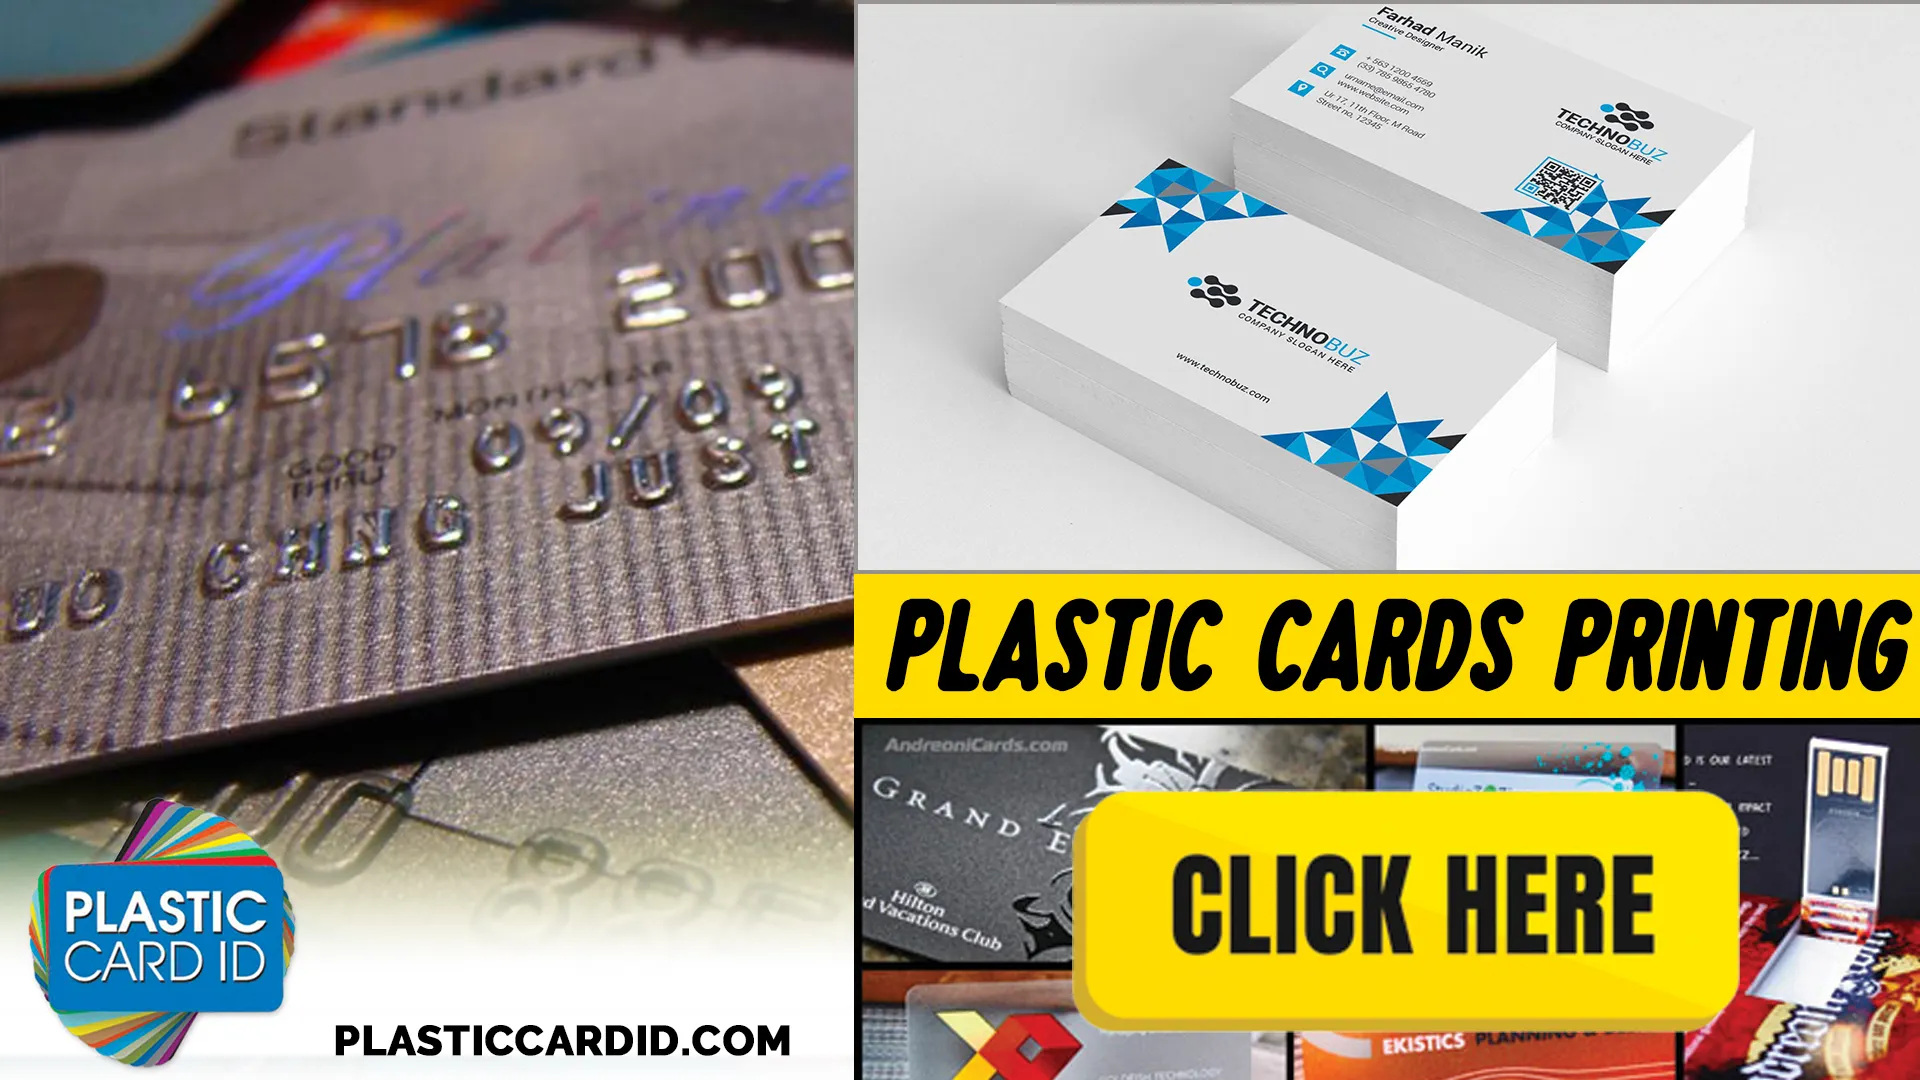 Plastic Cards Walk into the Digital Age